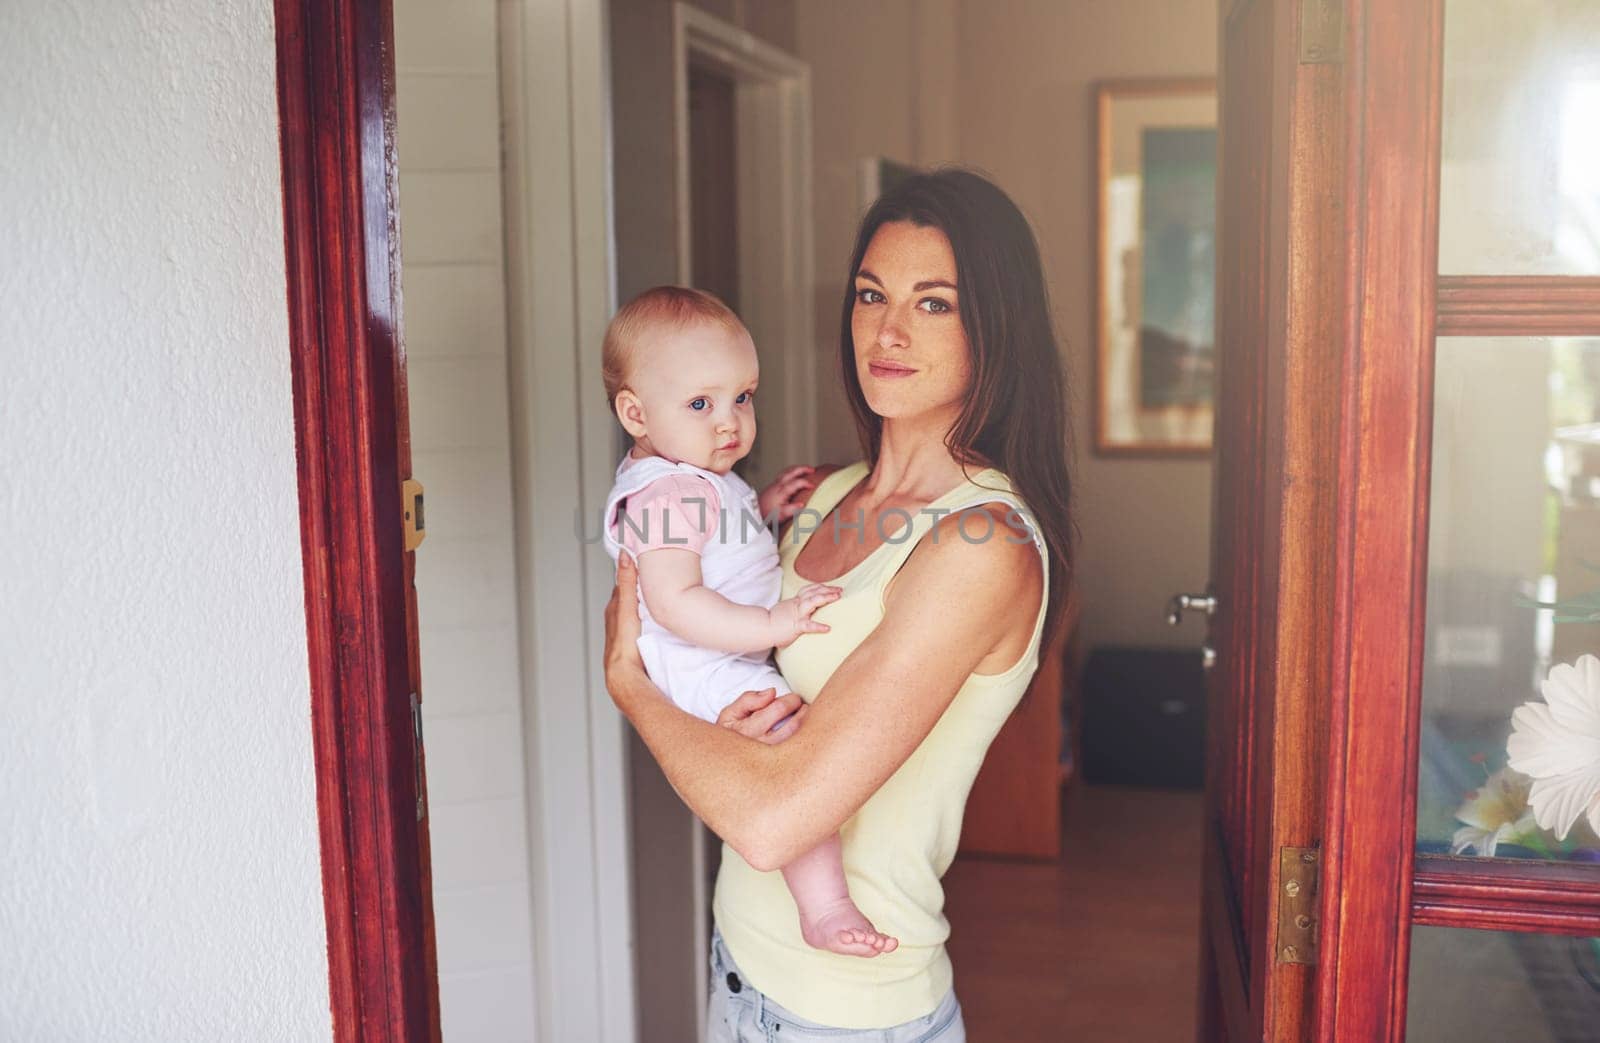 Safe at home. Cropped portrait of a young woman holding her baby daughter in a doorway